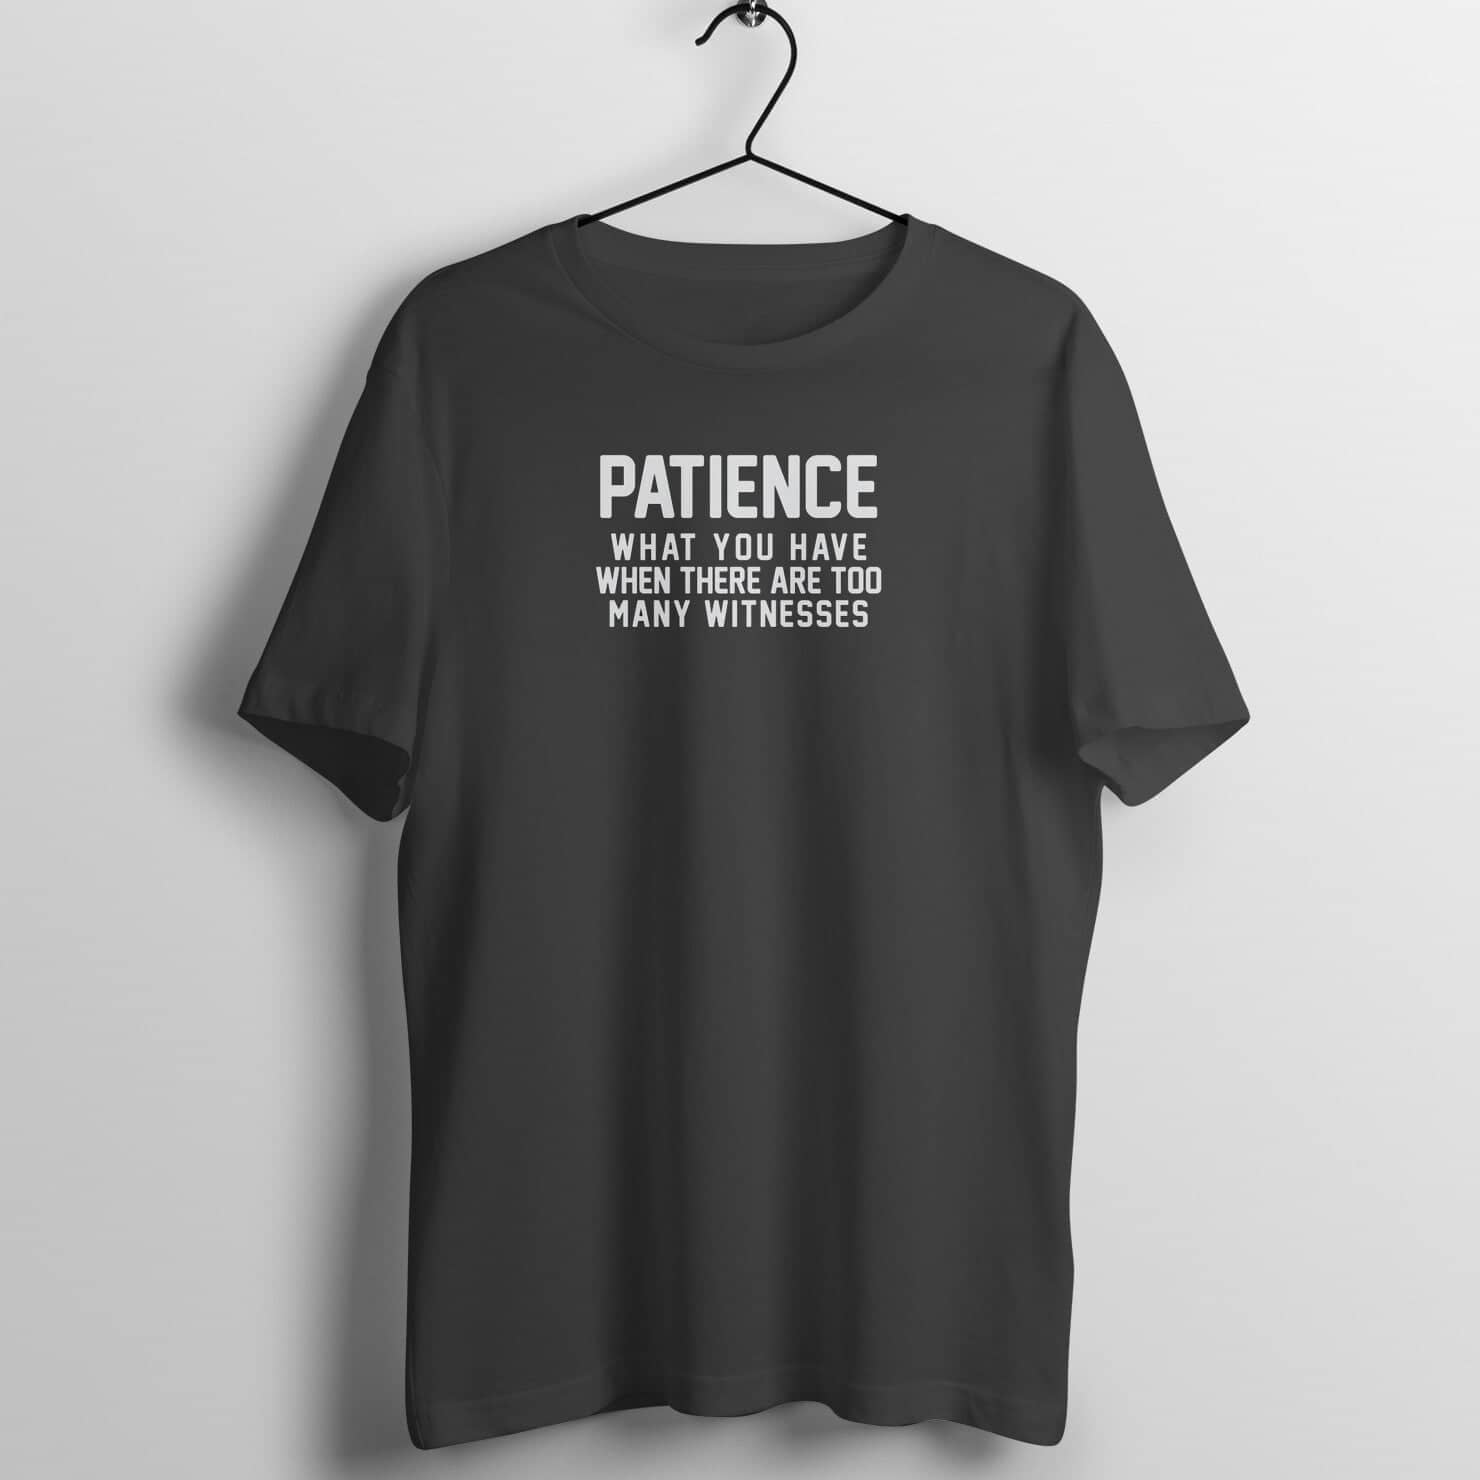 Patience Real Definition Funny Black T Shirt for Men and Women freeshipping - Catch My Drift India